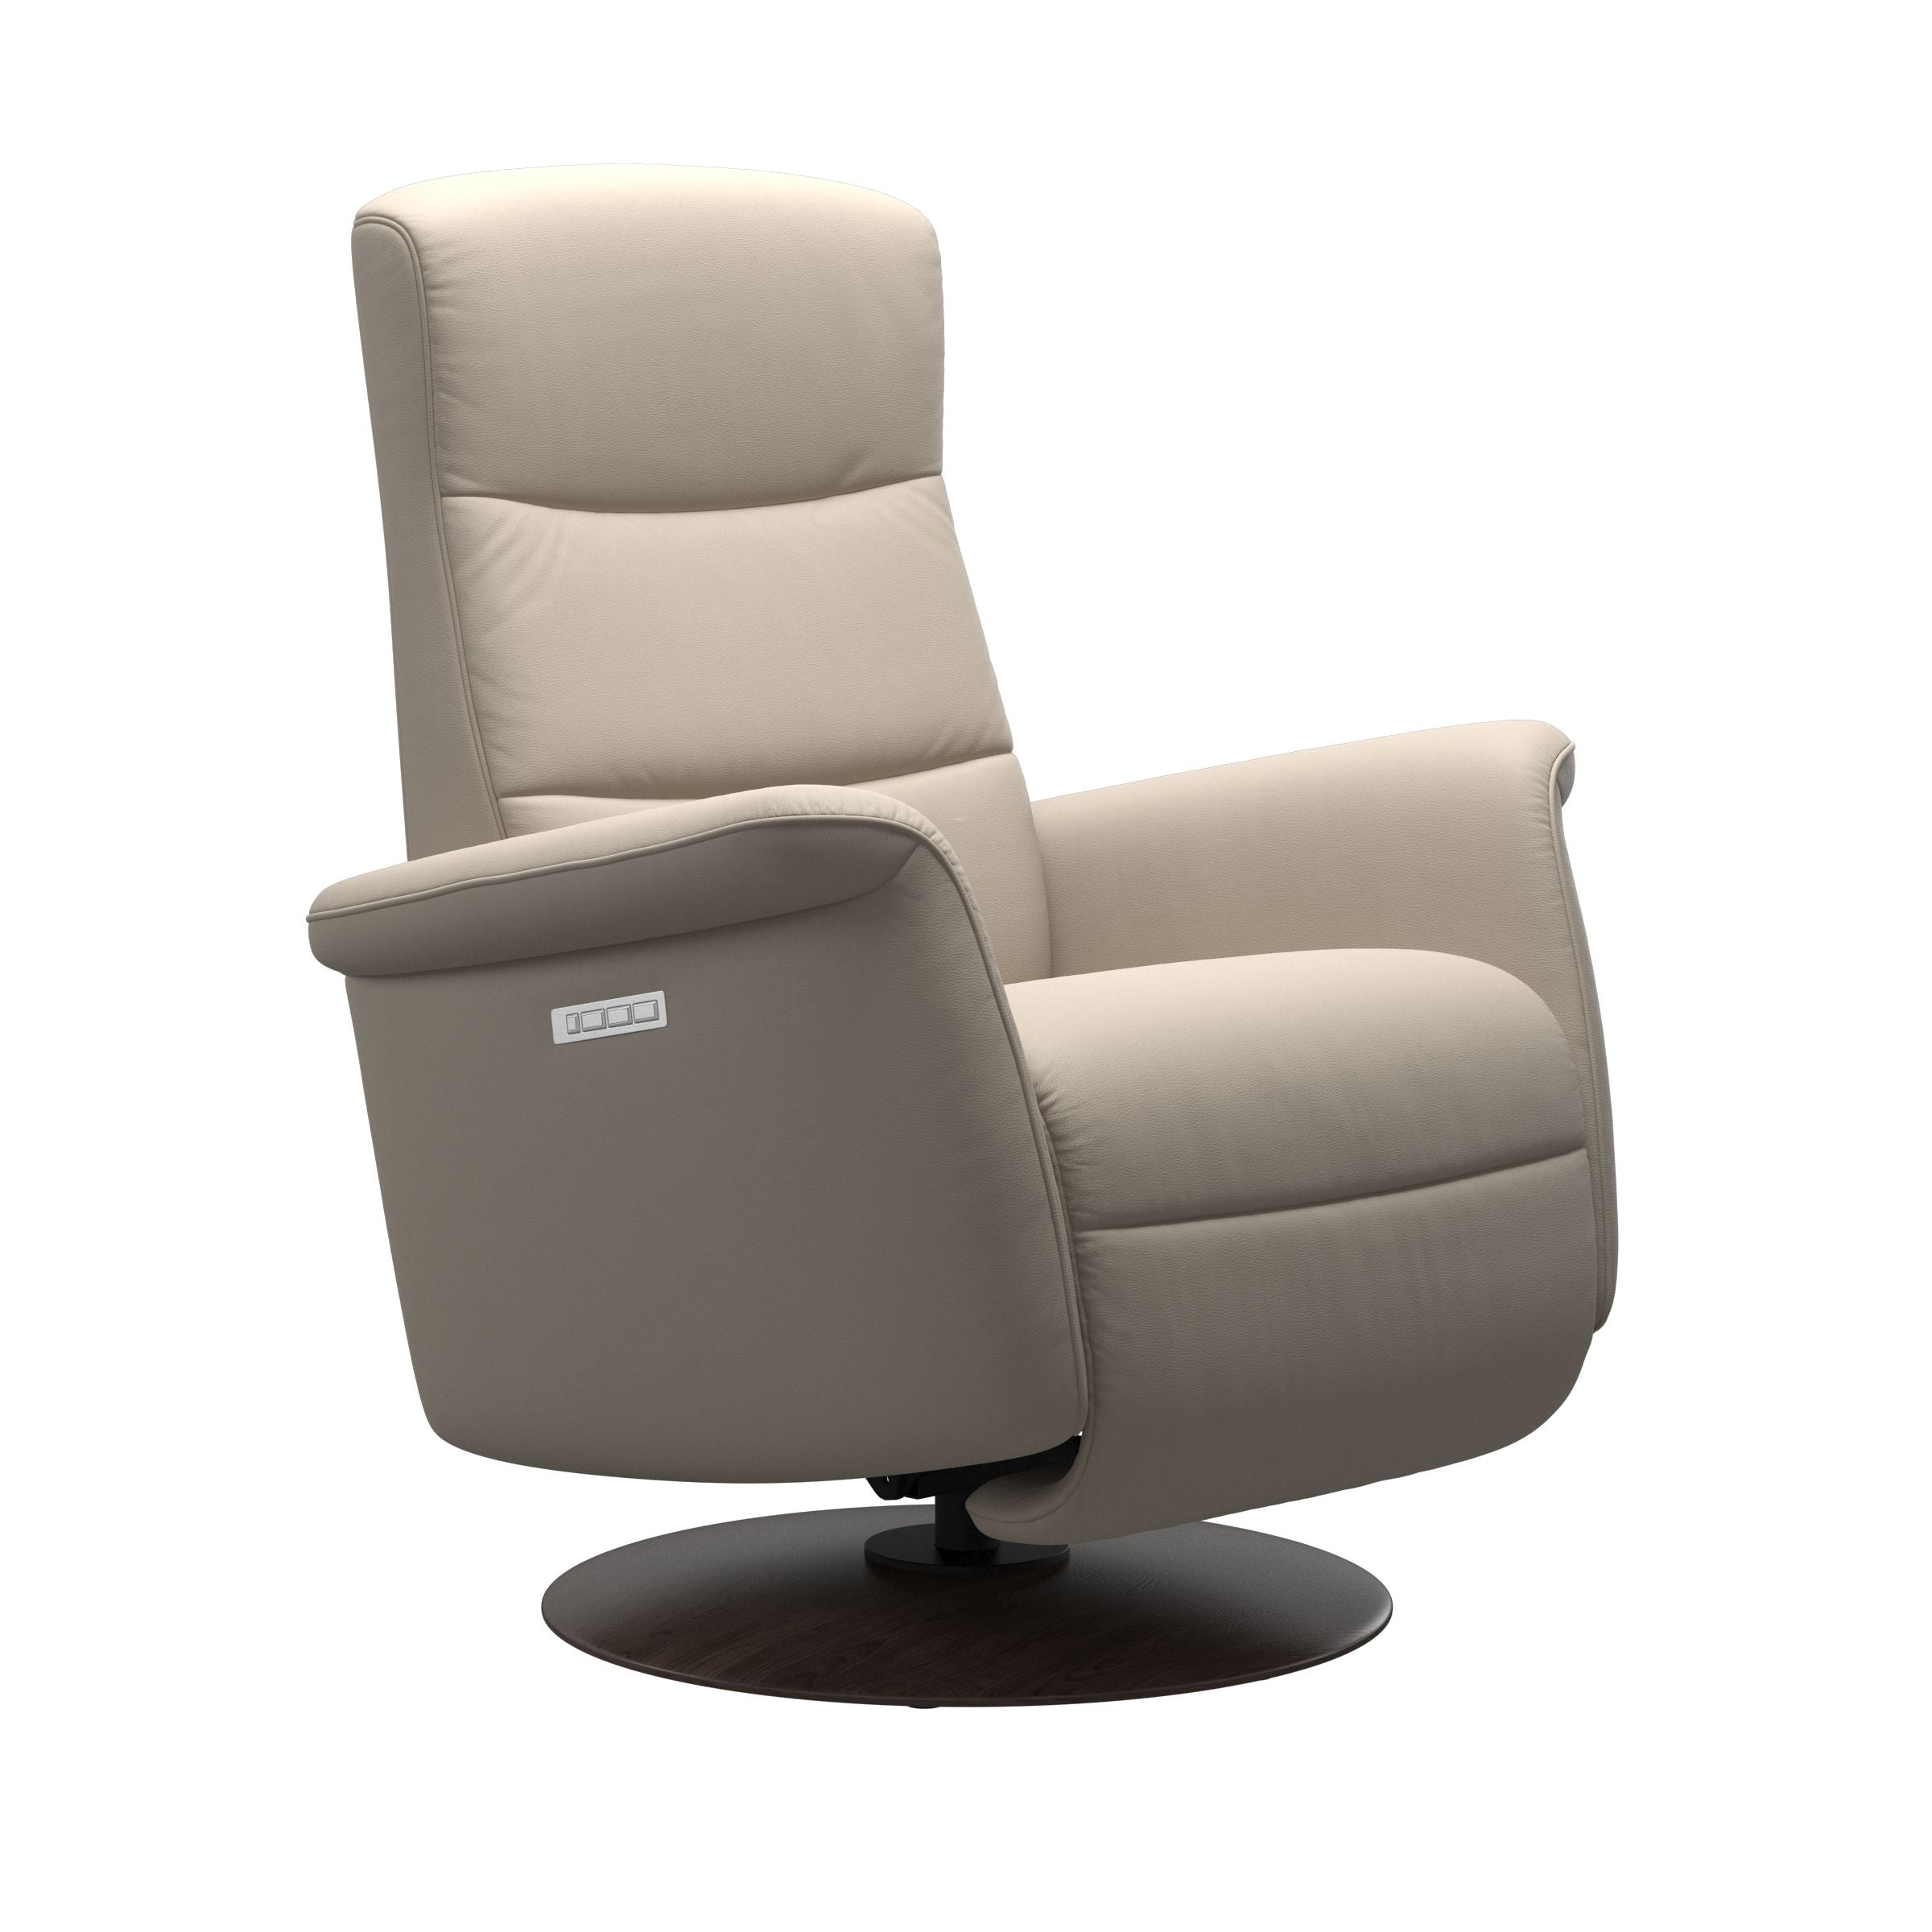 Stressless Mike Medium Recliner with Wood Moon Base